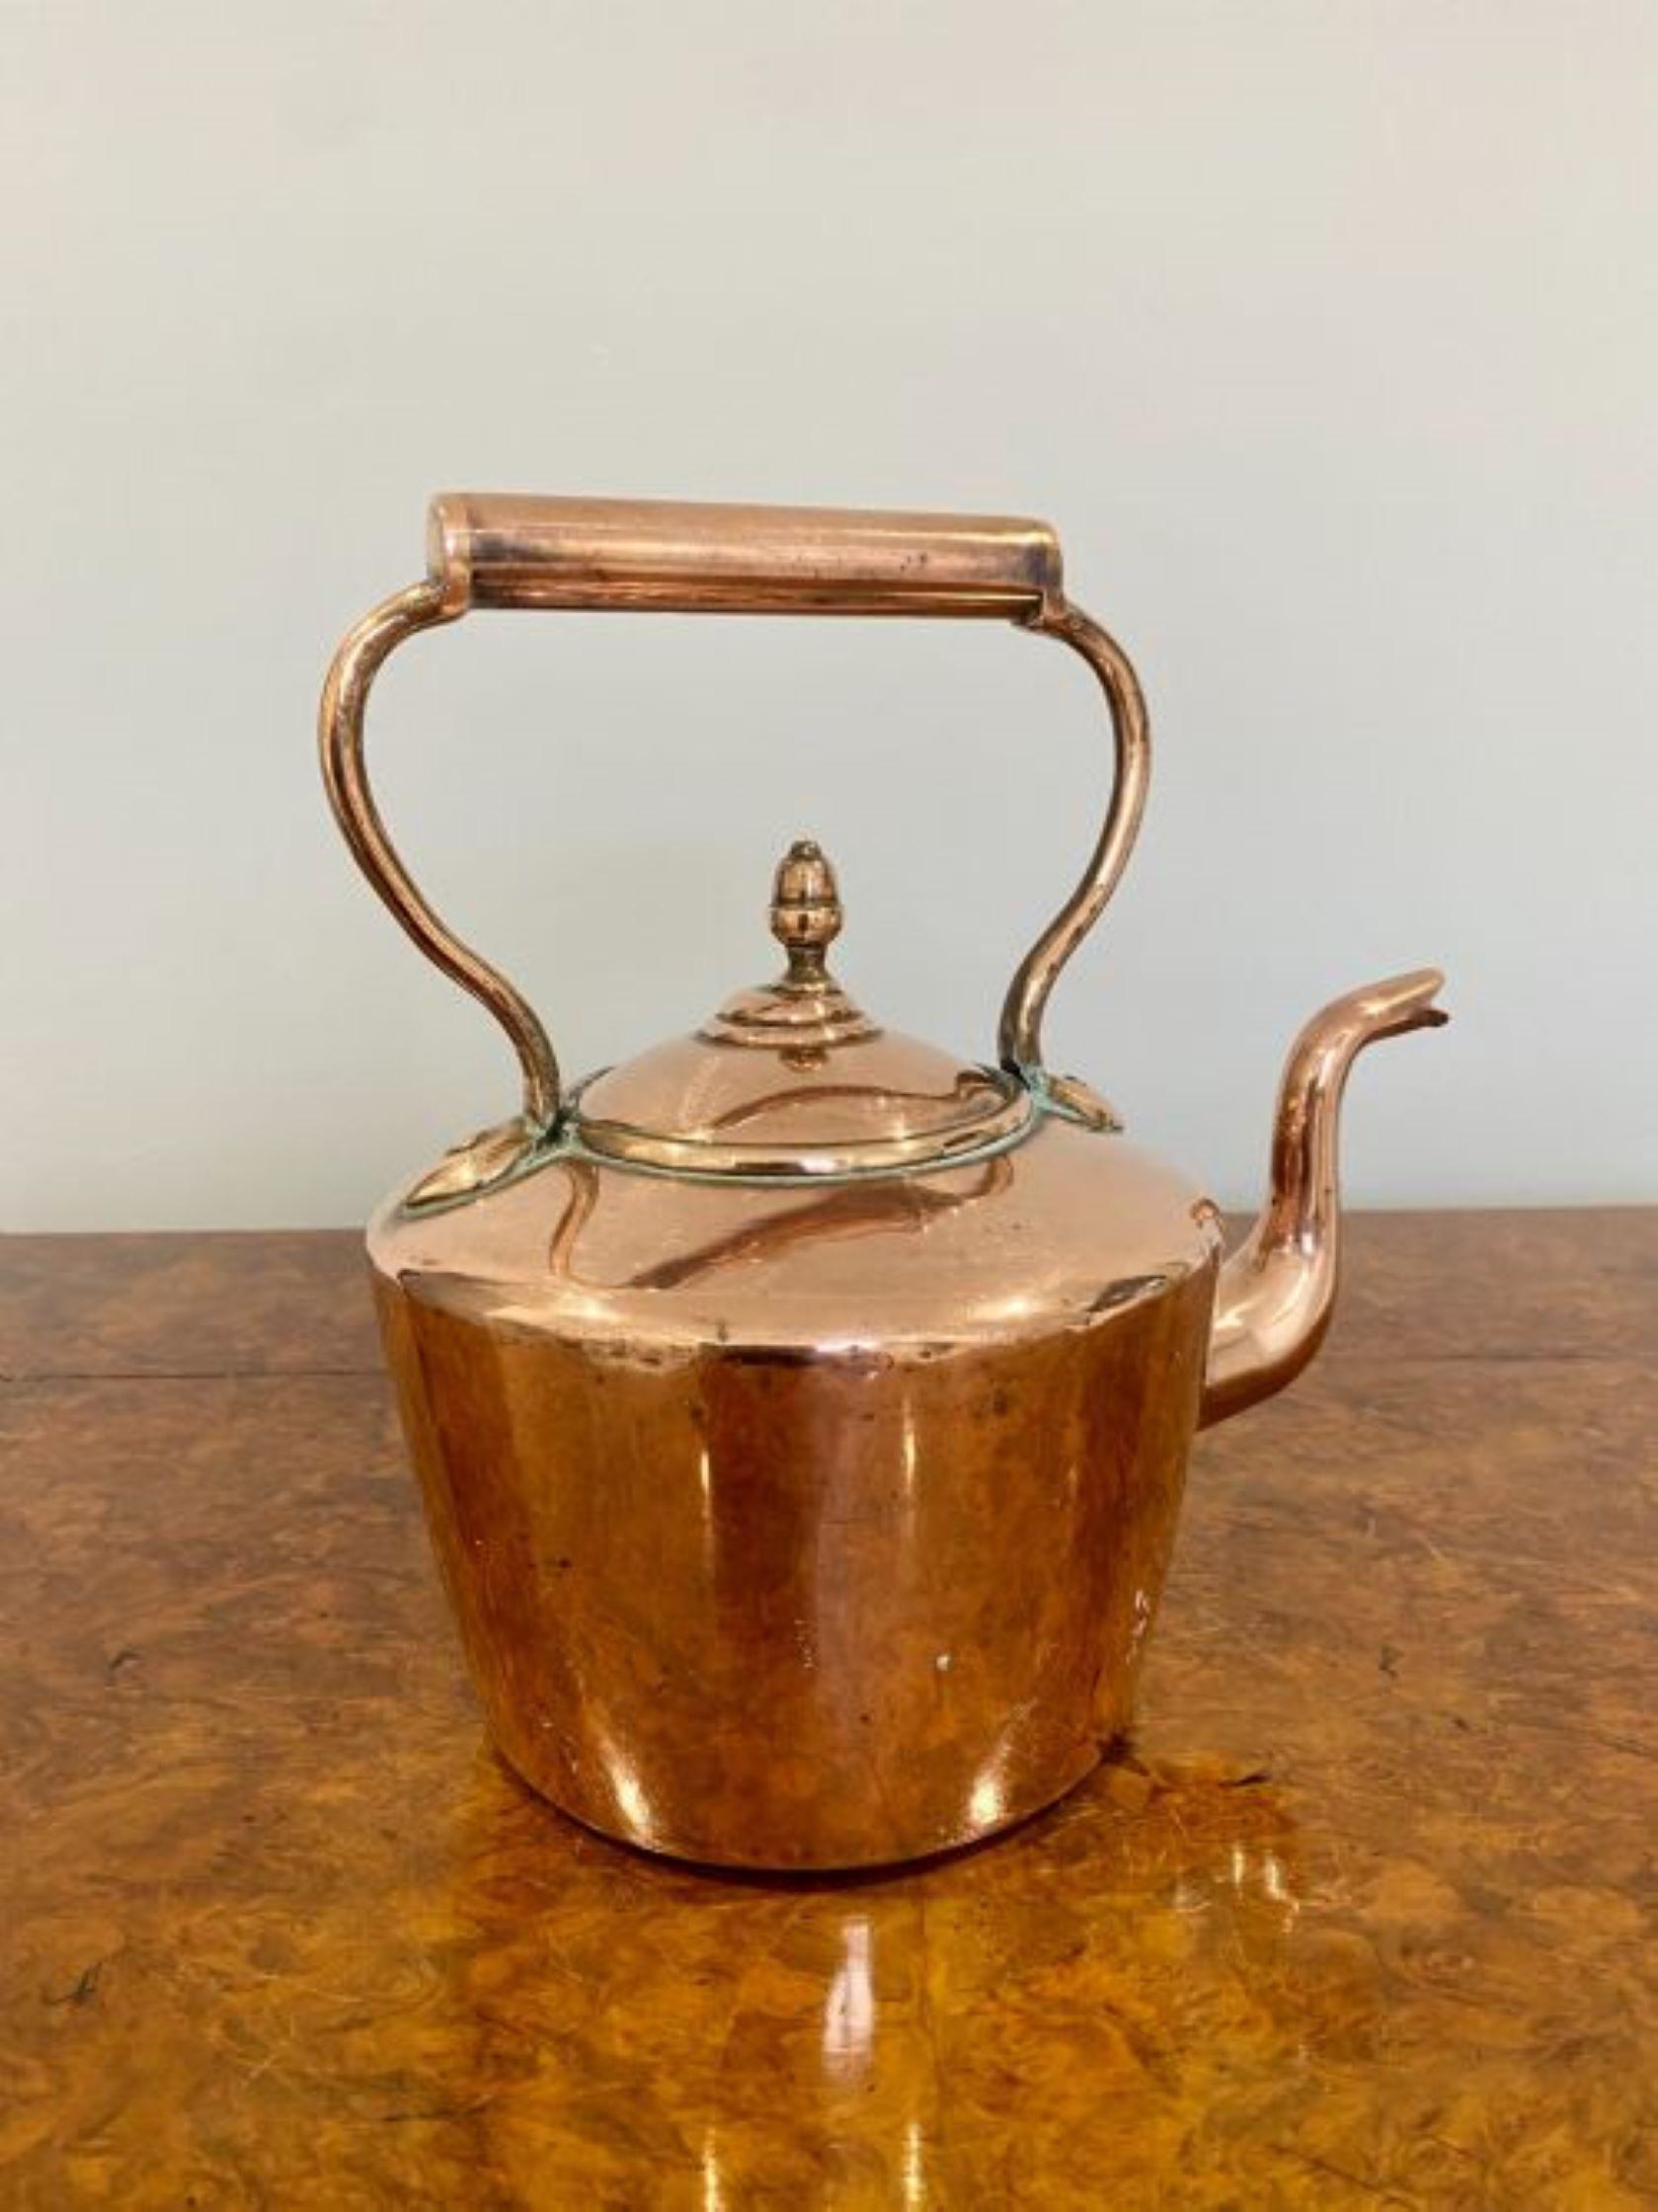 Antique George III quality small copper kettle having a quality shaped handle and spout with a lift off lid